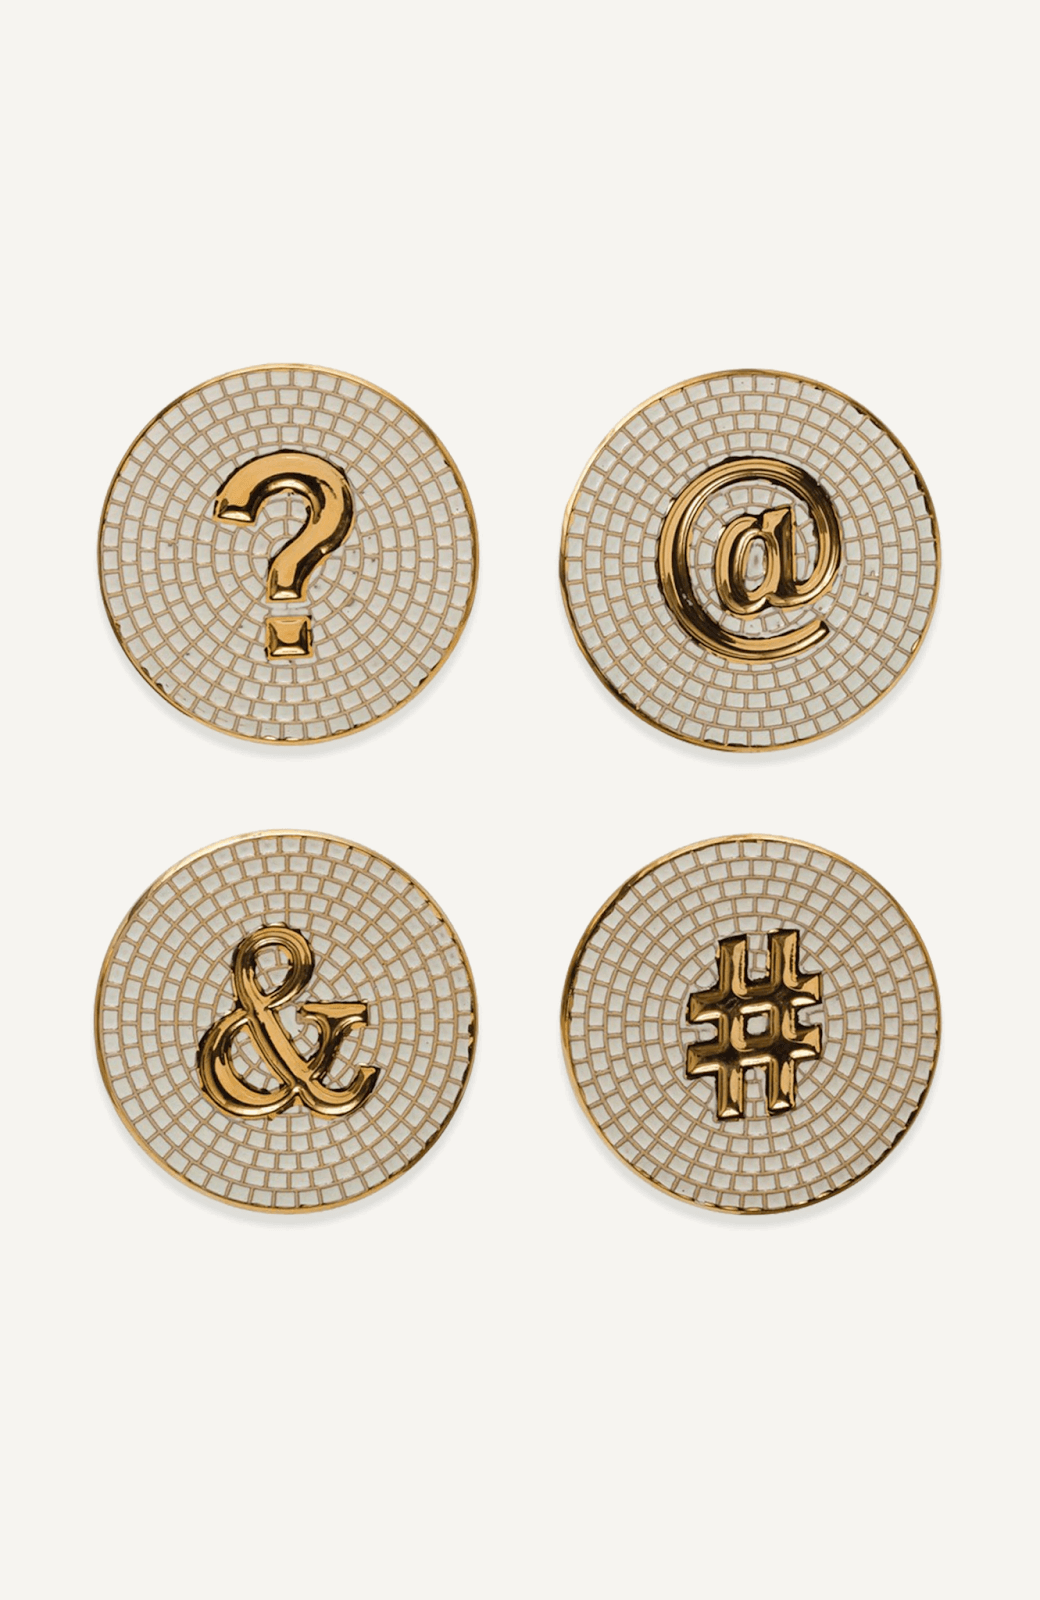 Gold and White Social Coasters from Effortless Composition